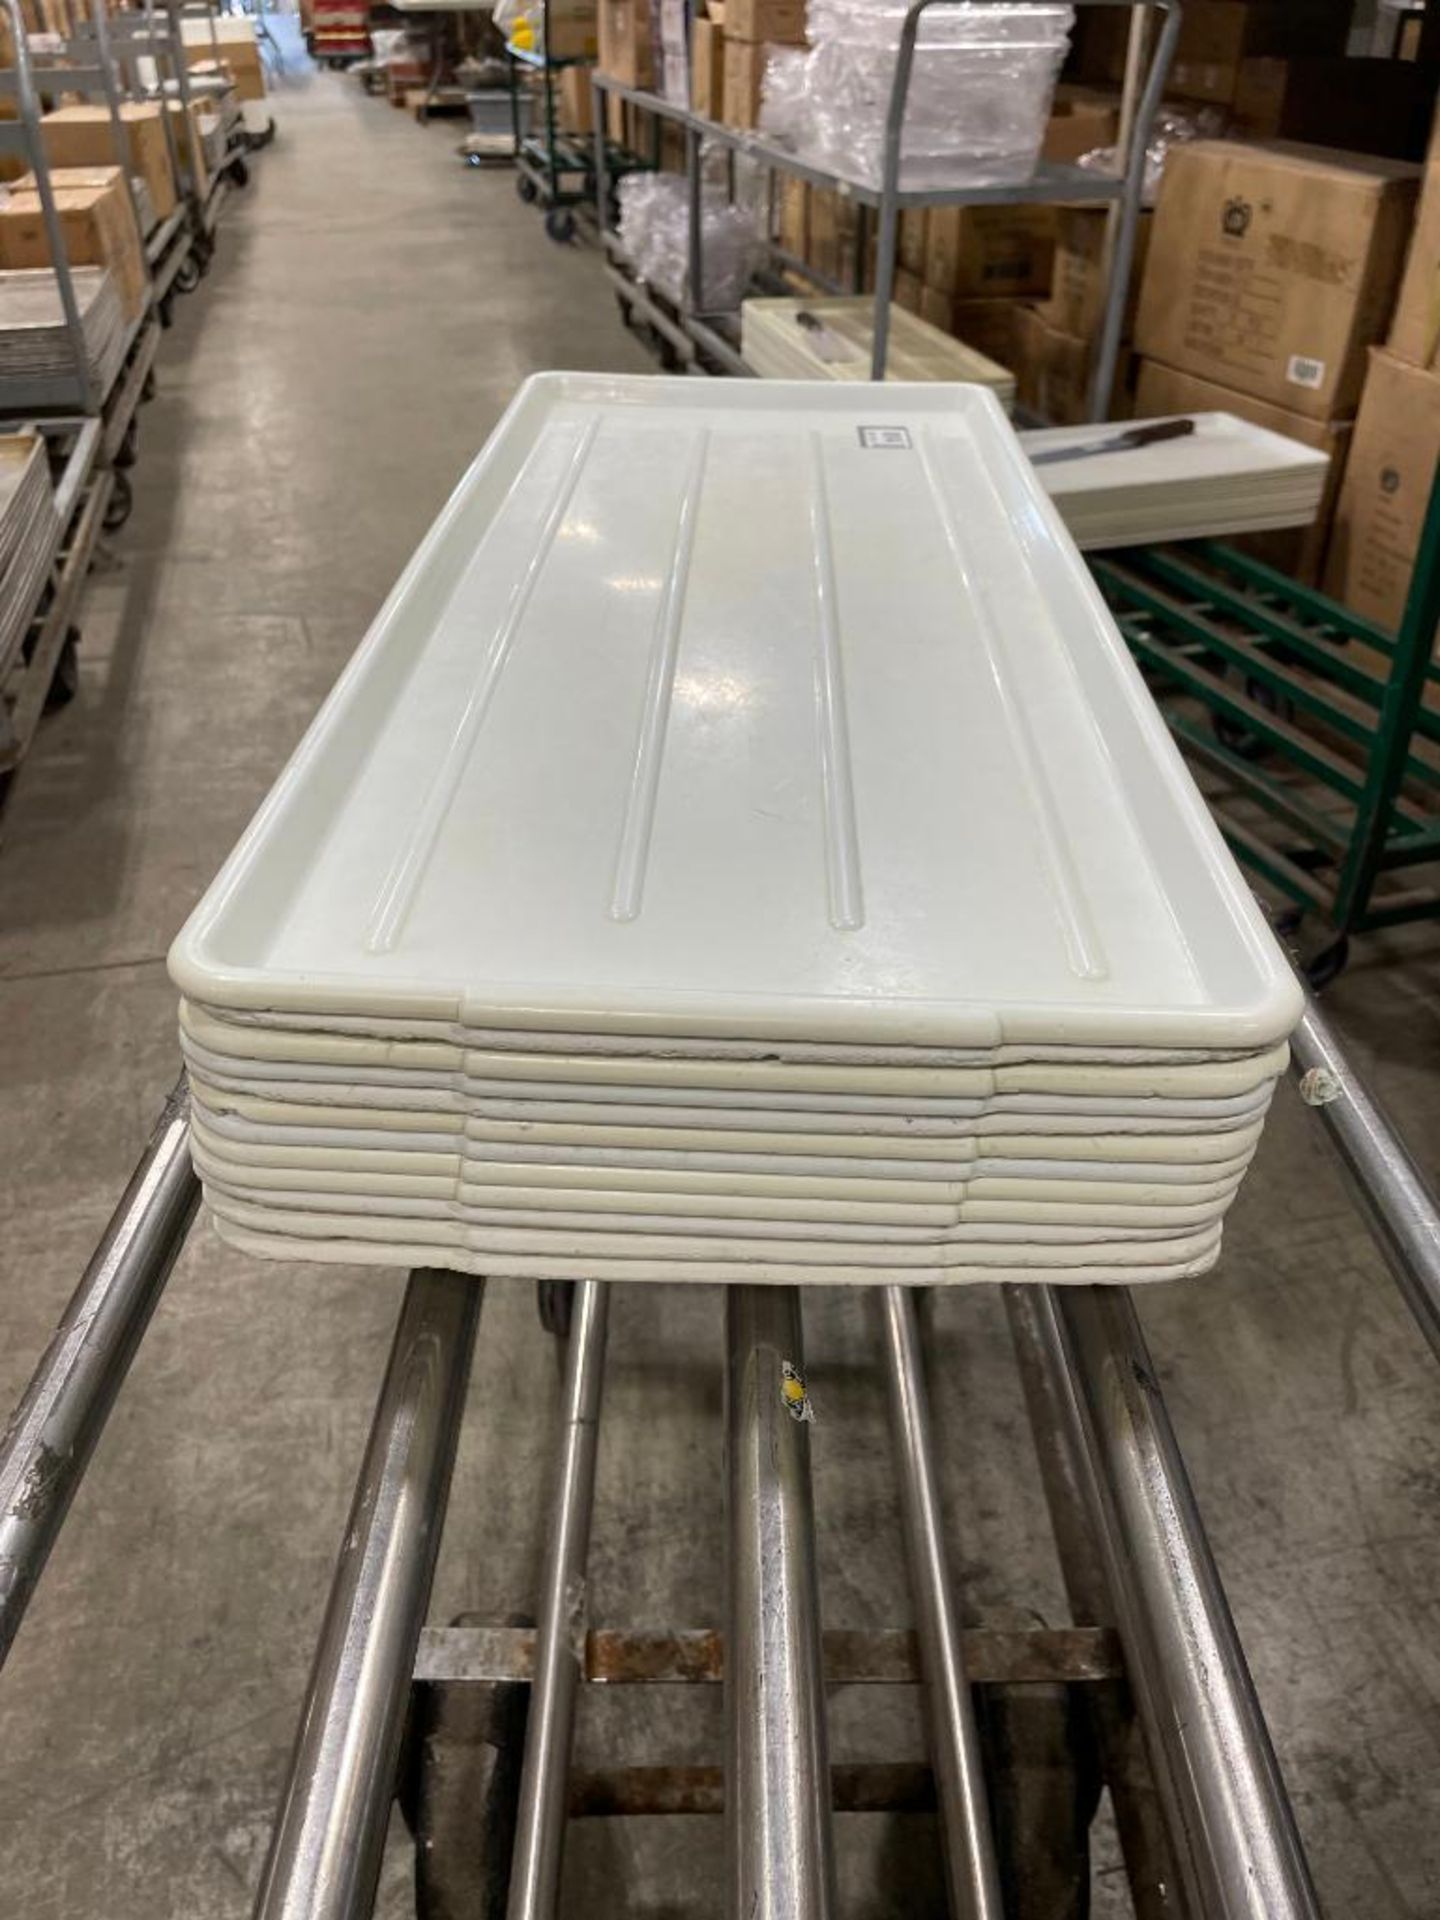 LOT OF APPROX. (12) 30" X 12.5" PLASTIC TRAYS - Image 3 of 3